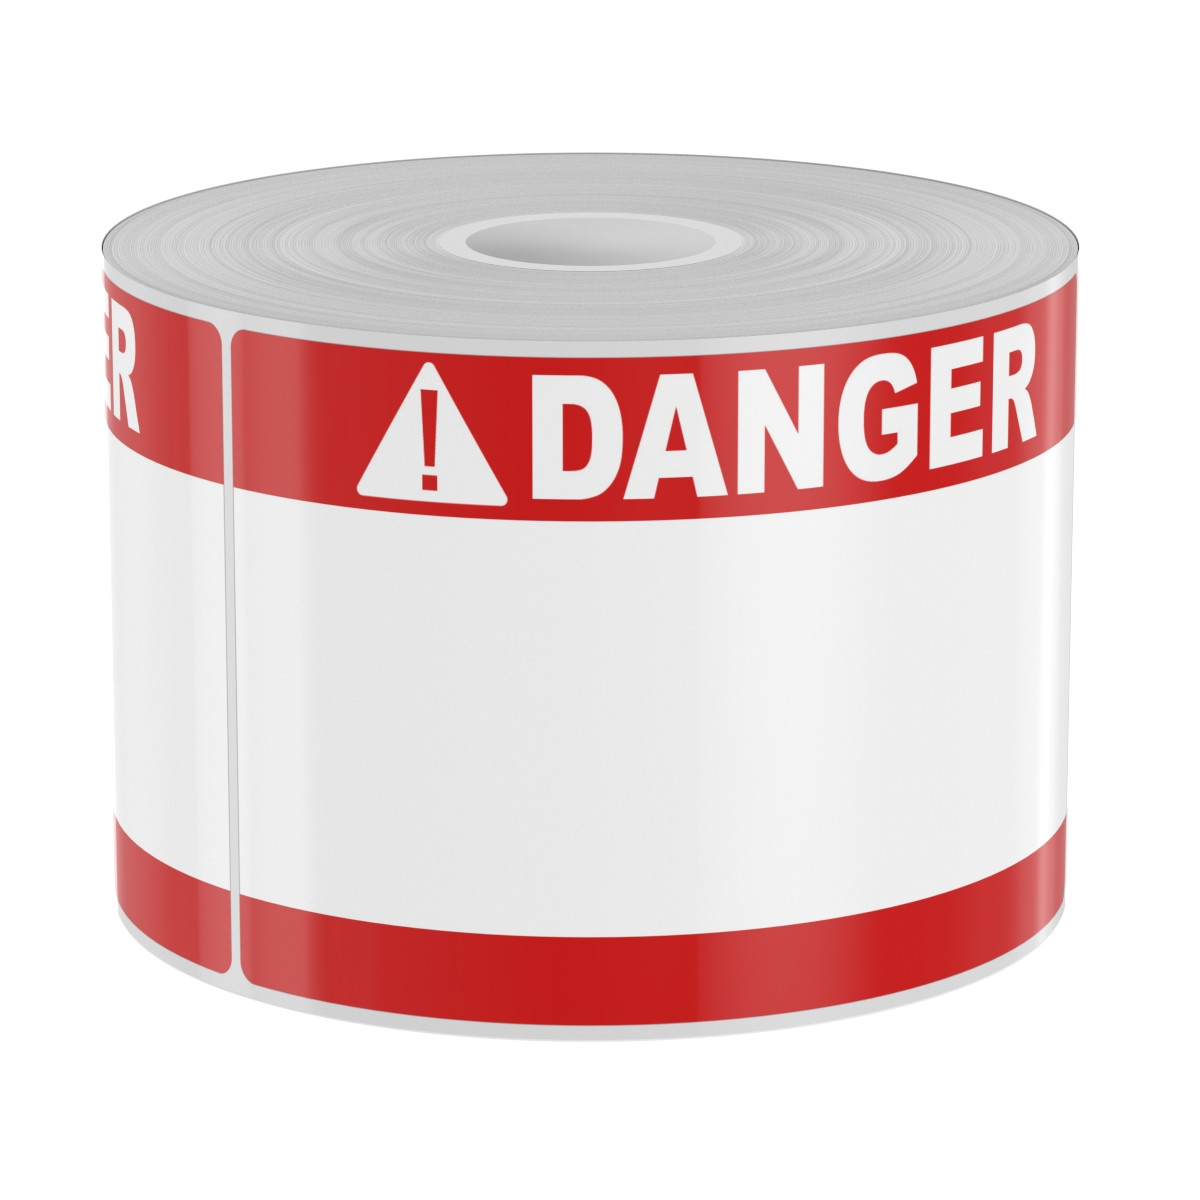 250 3in x 5in High-Performance Die-Cut Red Double Band White Danger